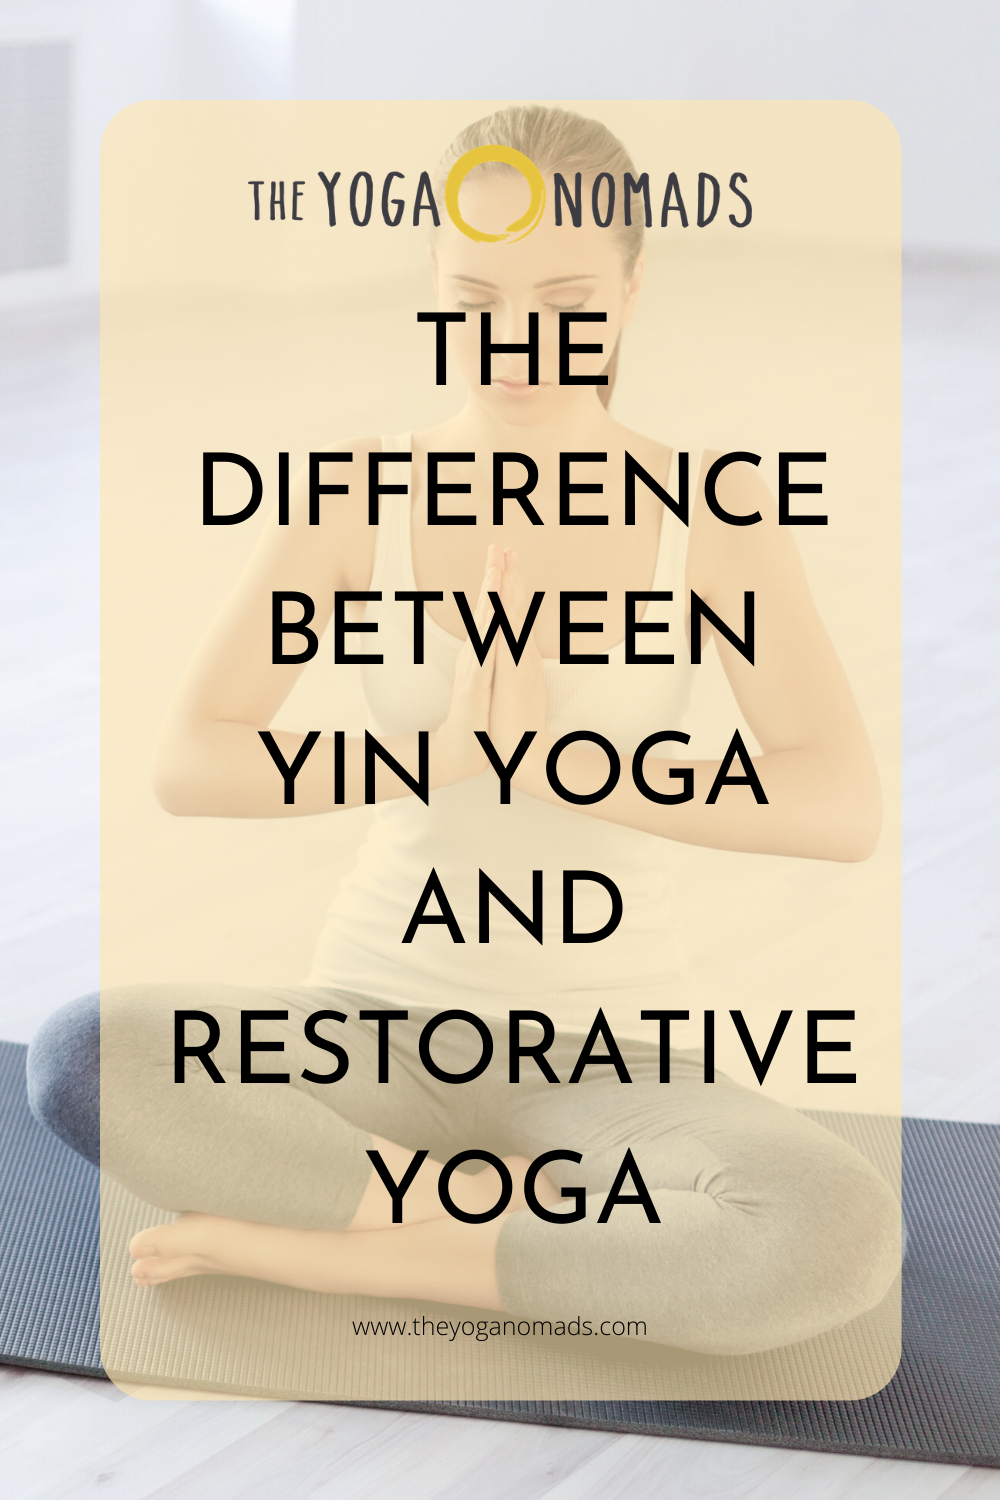 The Difference Between Yin Yoga and Restorative Yoga